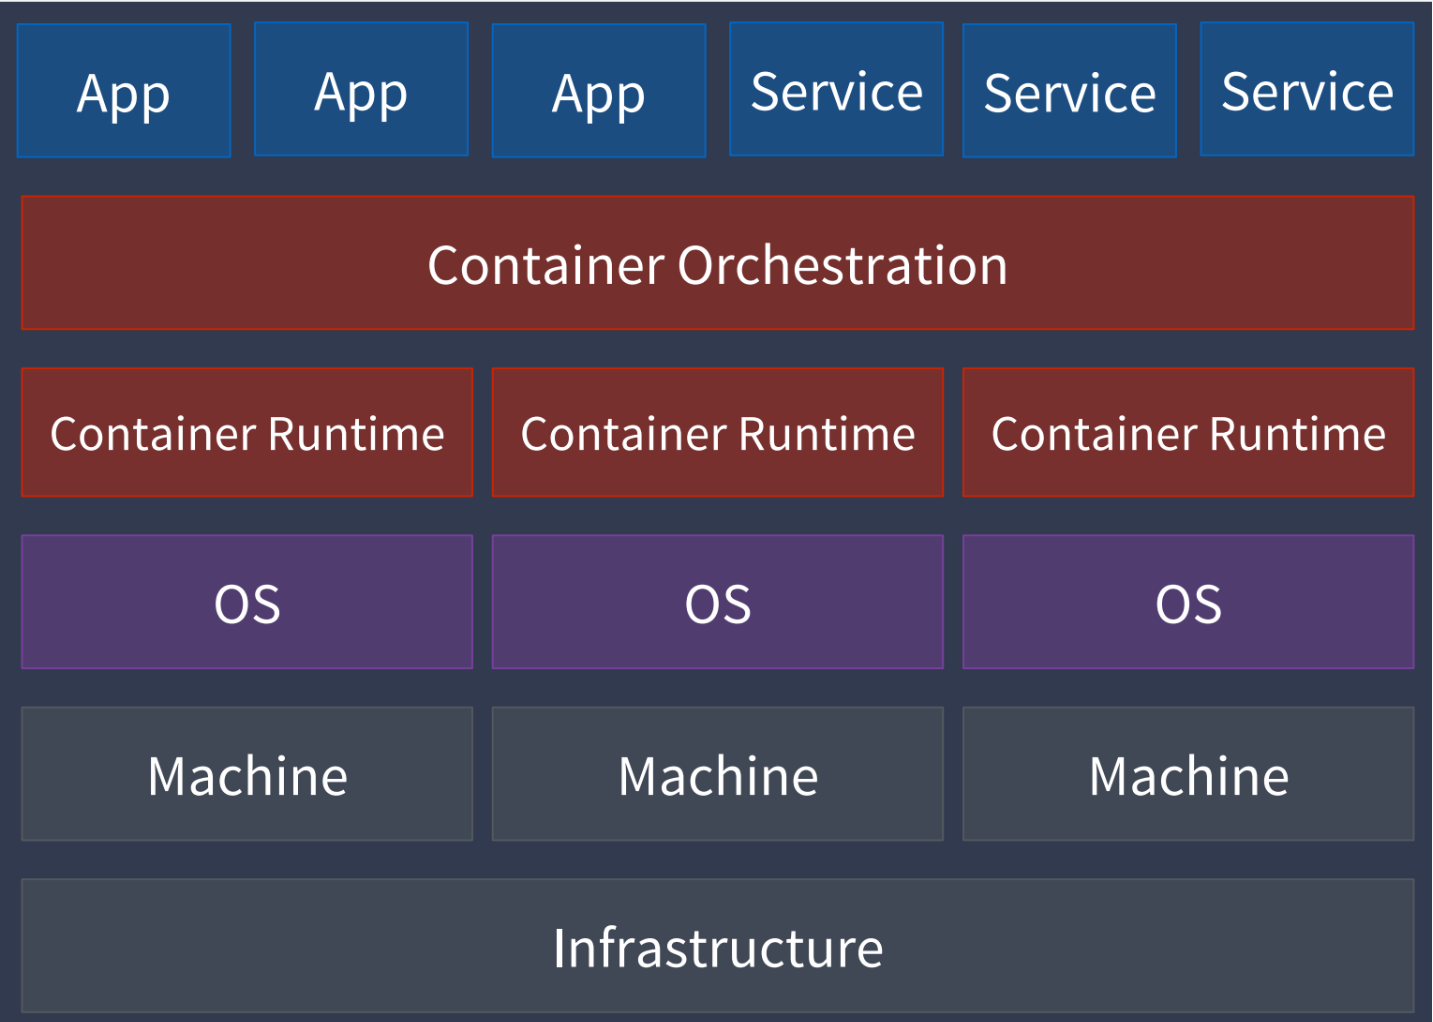 container-orchestration